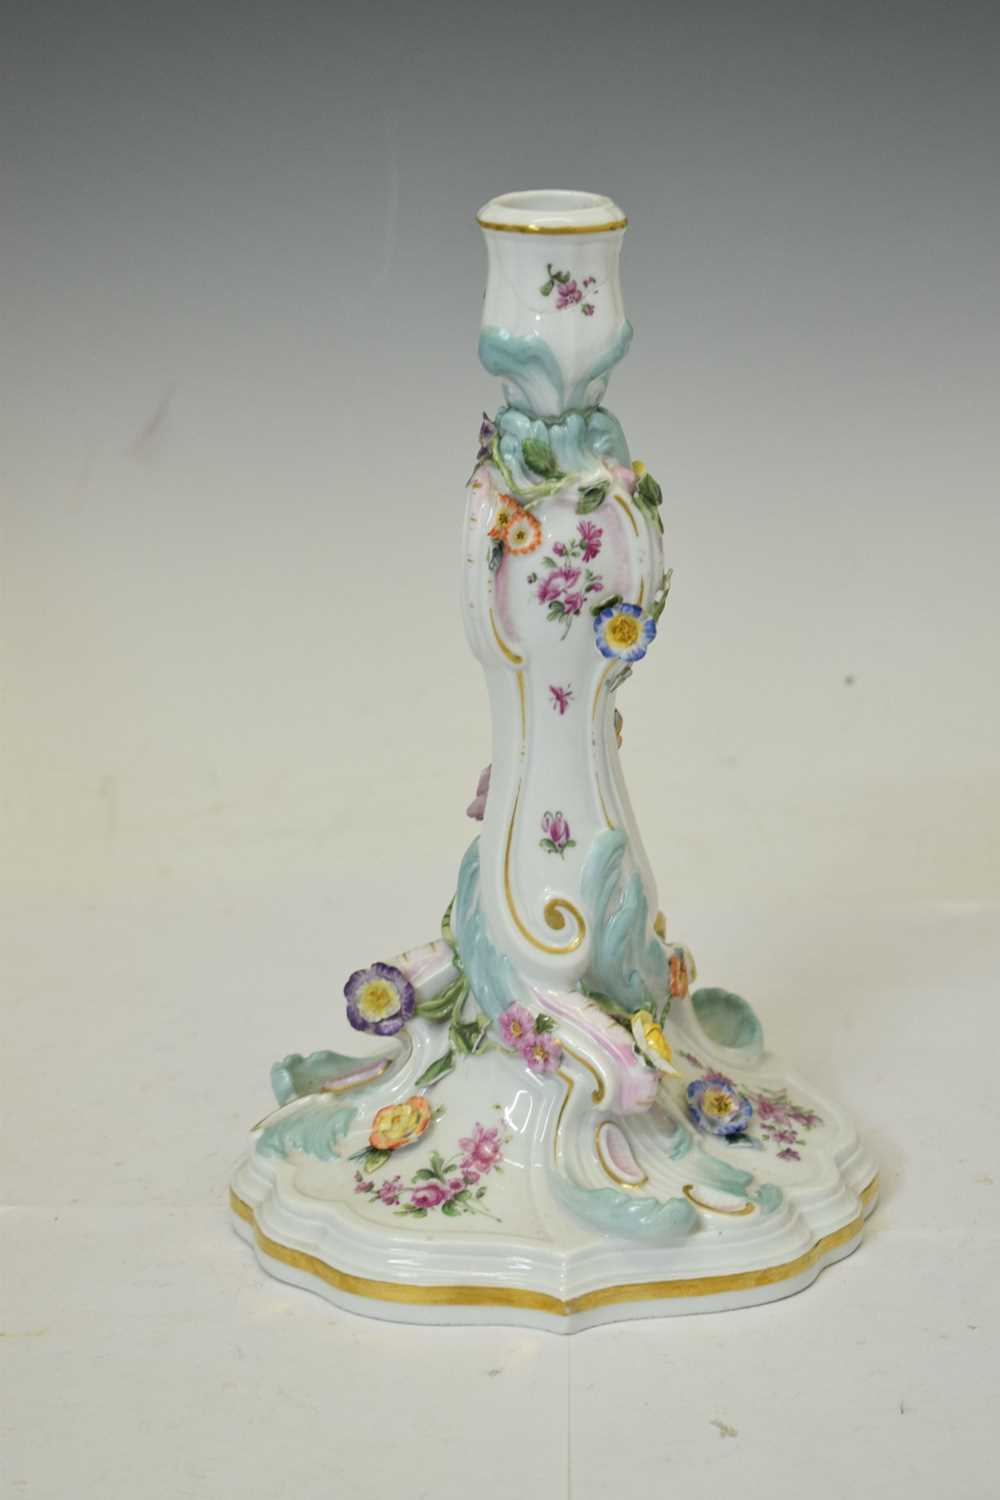 Late 19th/early 20th century Meissen porcelain candlestick - Image 4 of 9